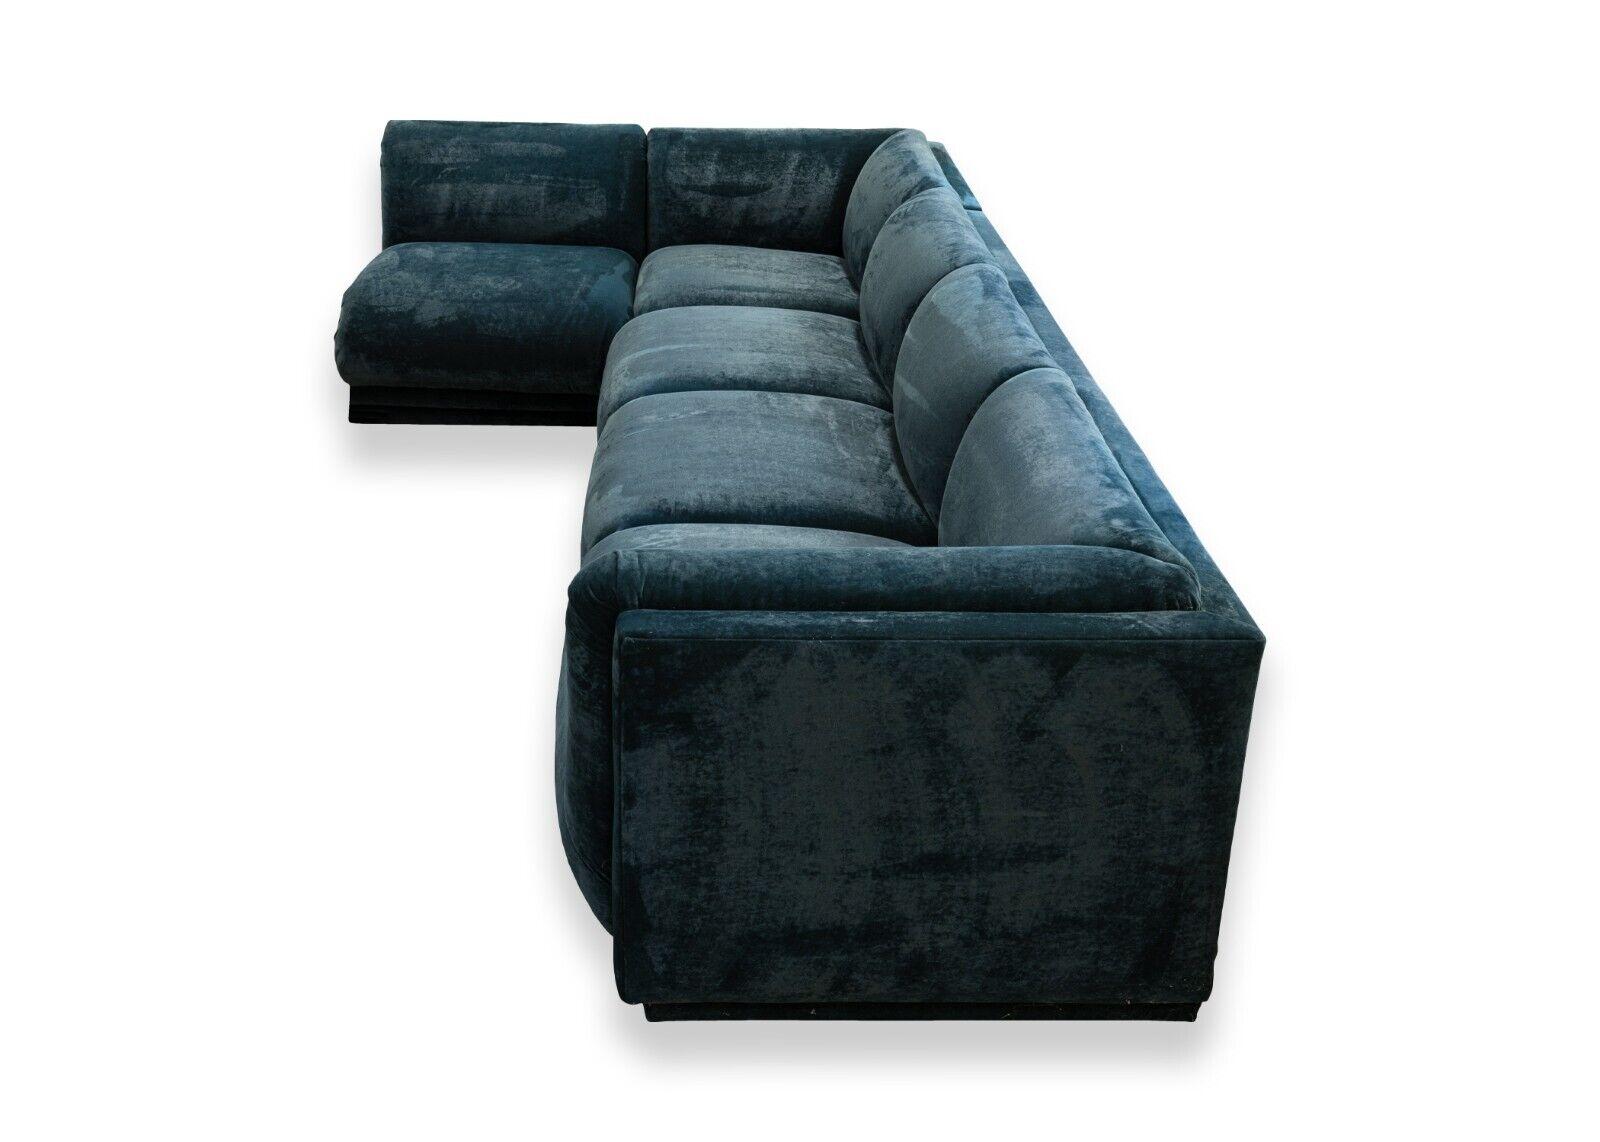 A modular blue green crushed velvet sofa sectional. This stunning sectional is covered in a very unique velvet color reminiscent of blues and greens. The color shifts slightly with the lighting its placed in. This sectional consists of three pieces: